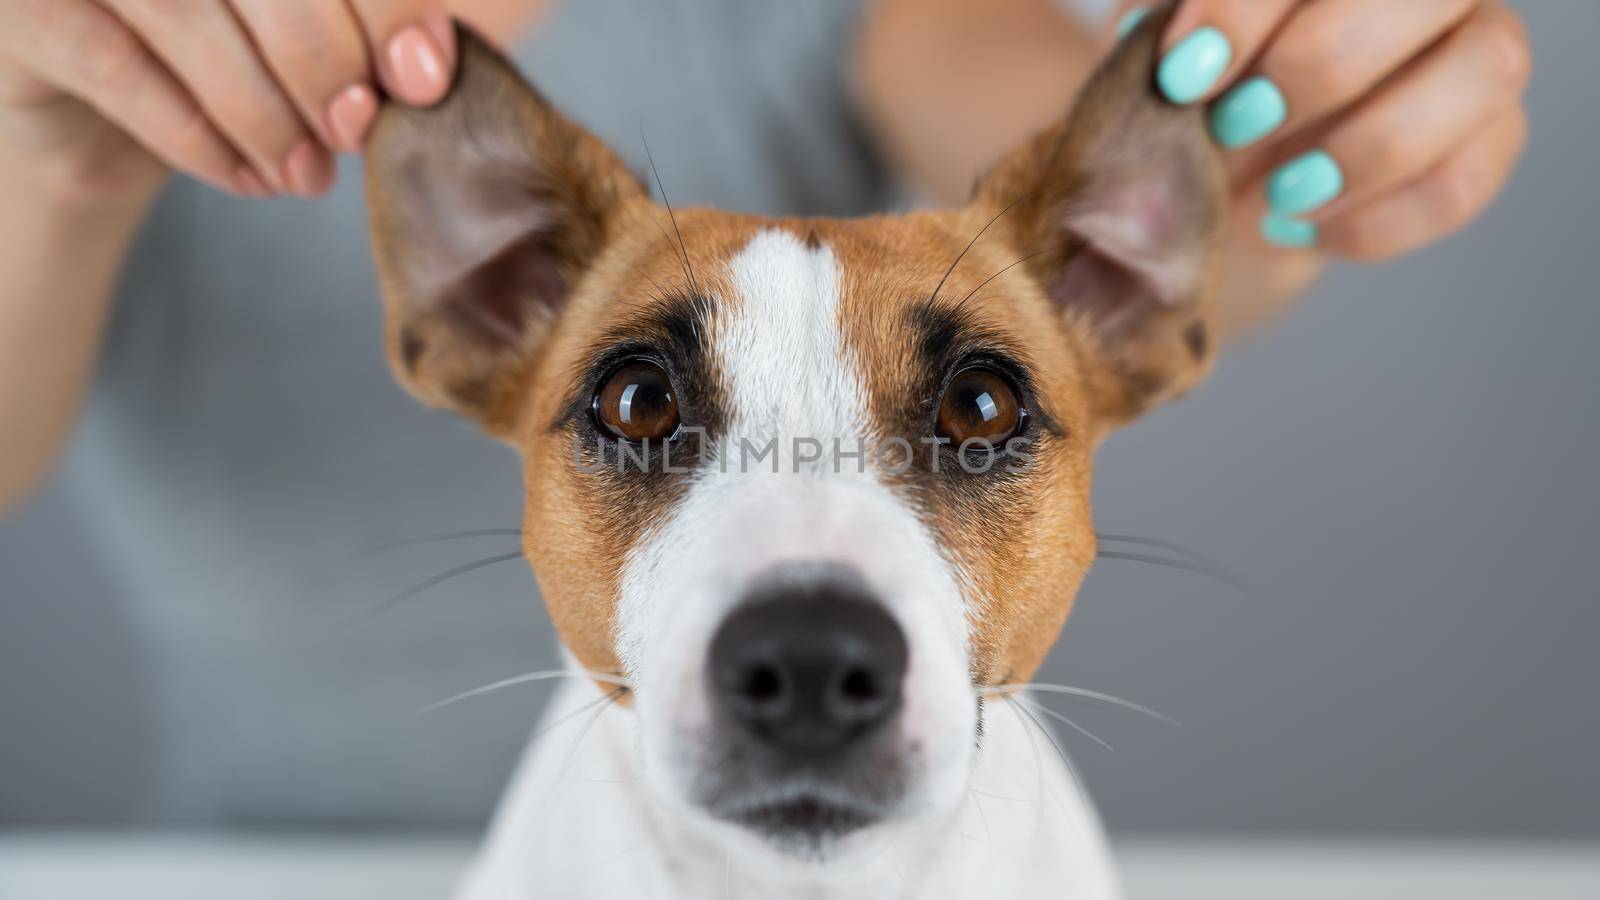 The woman holds the ears of the dog Jack Russell Terrier and pulls it in different directions by mrwed54